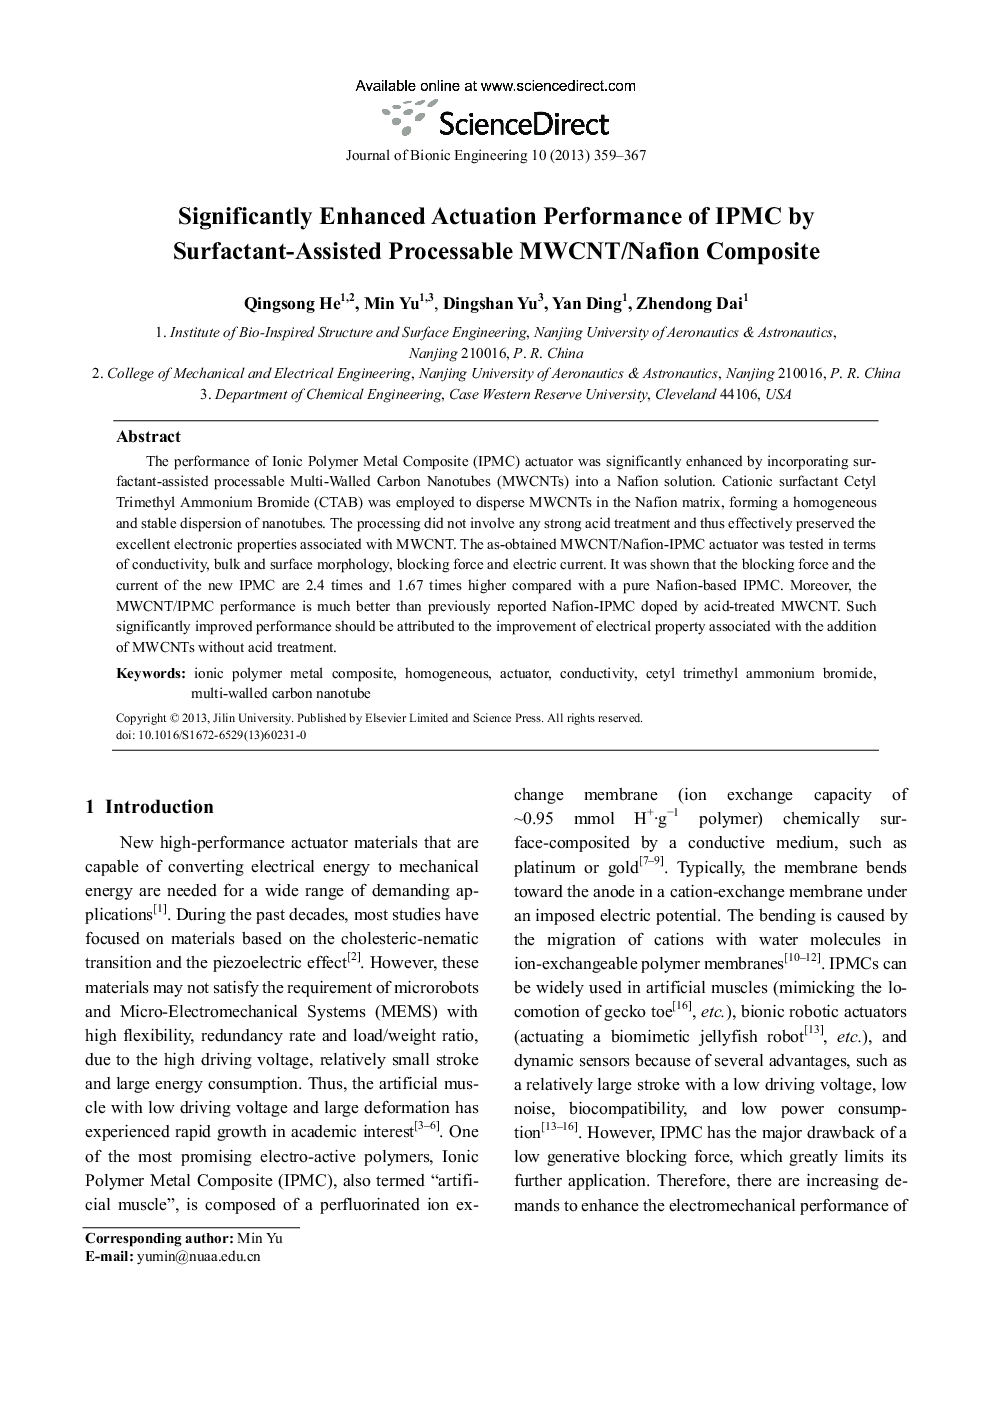 Significantly Enhanced Actuation Performance of IPMC by Surfactant-Assisted Processable MWCNT/Nafion Composite